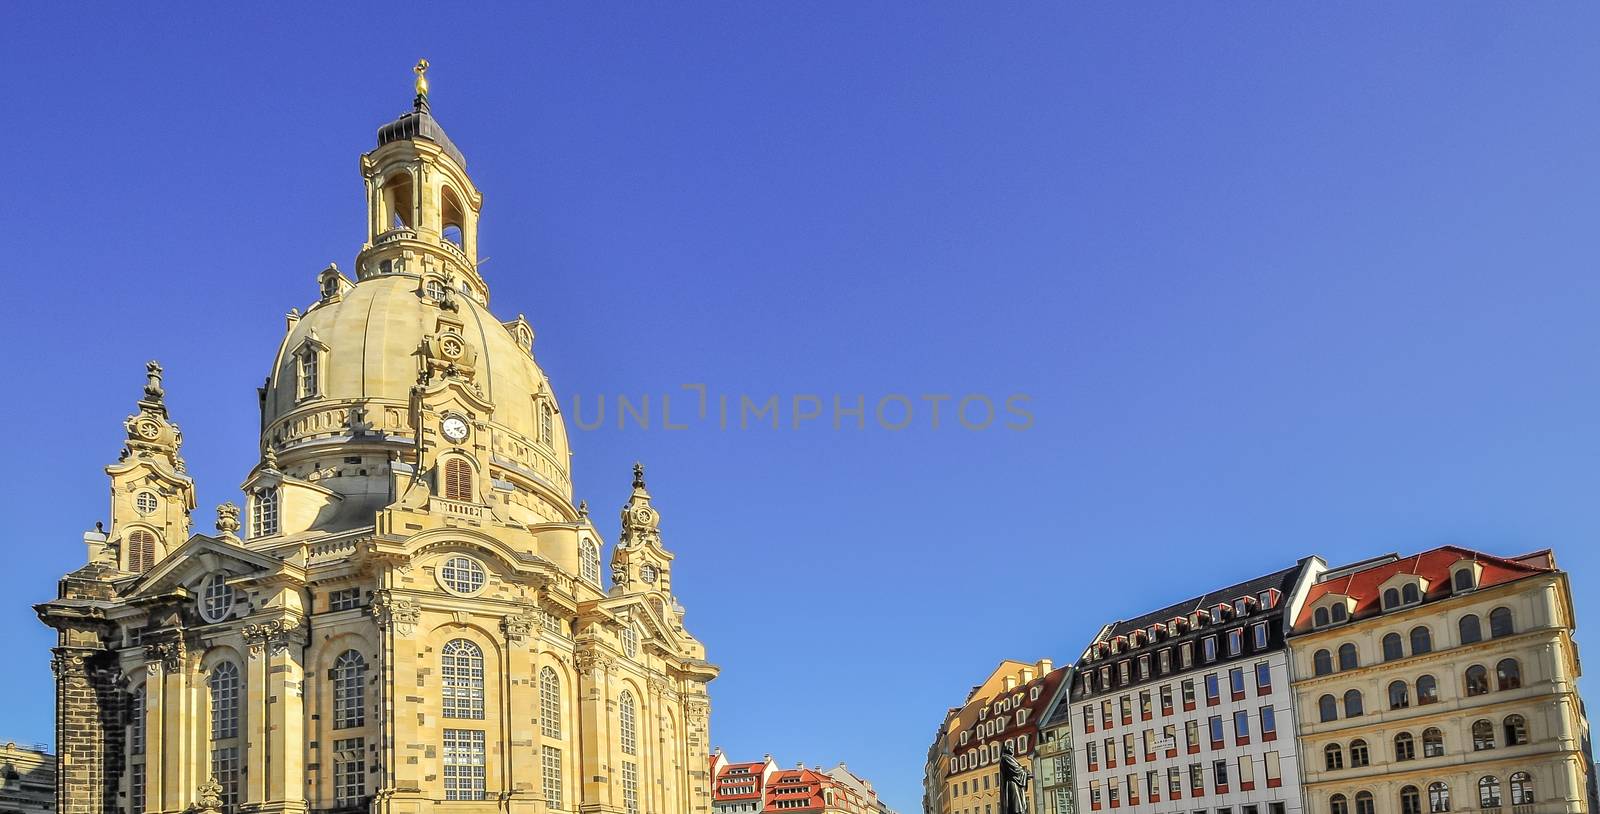 Church Frauenkirche with resident buildings in Dresden Germany on a sunny day with blue